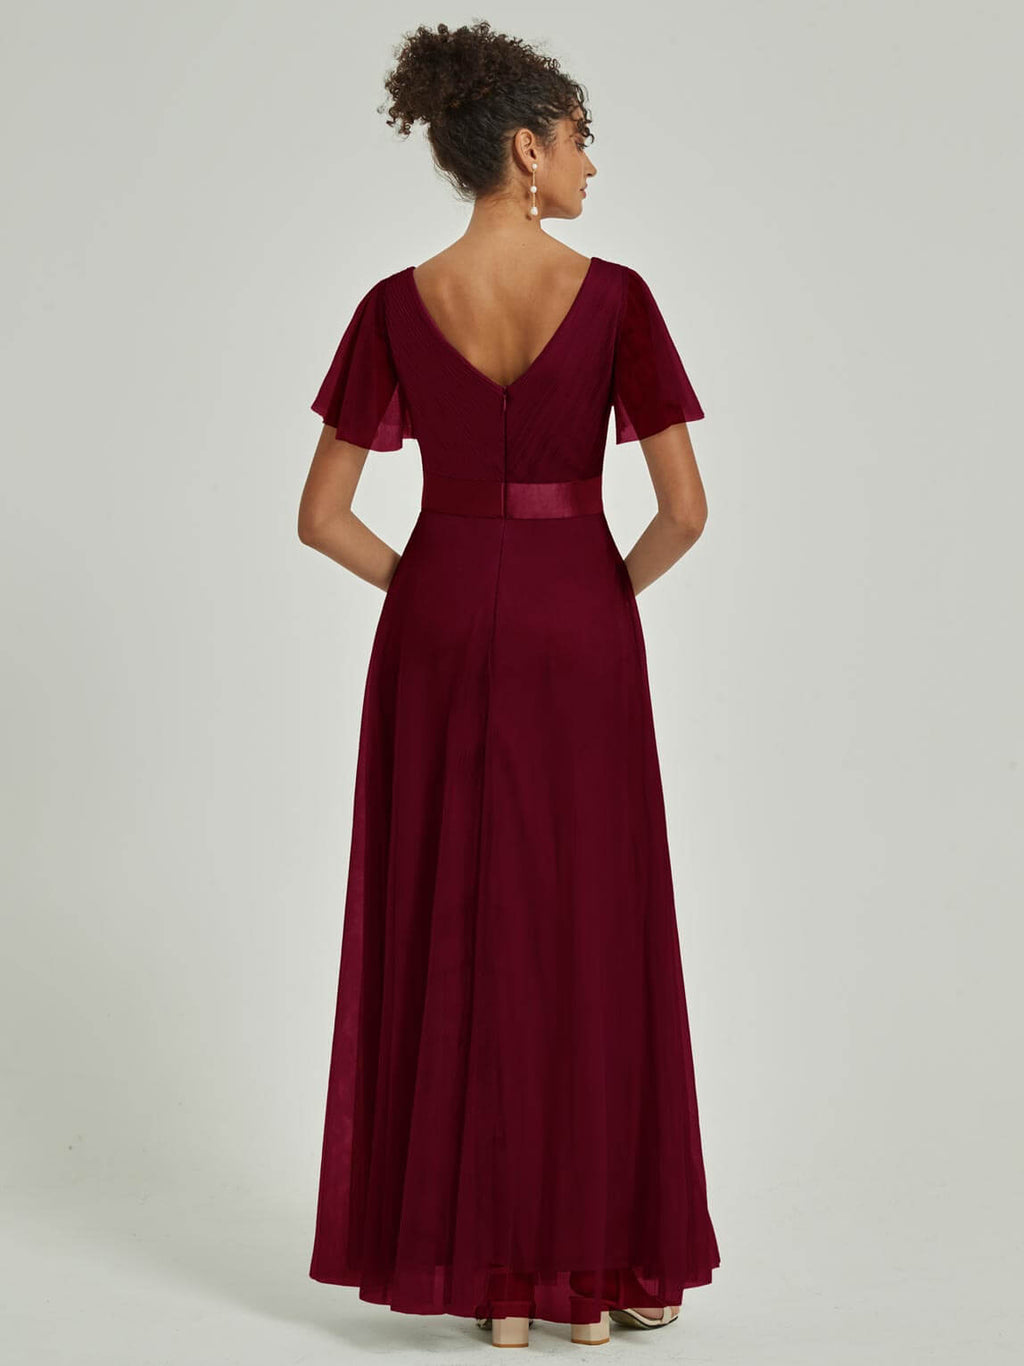 NZ Bridal Tulle Burgundy V Backless bridesmaid dresses 07962ep Lucy a